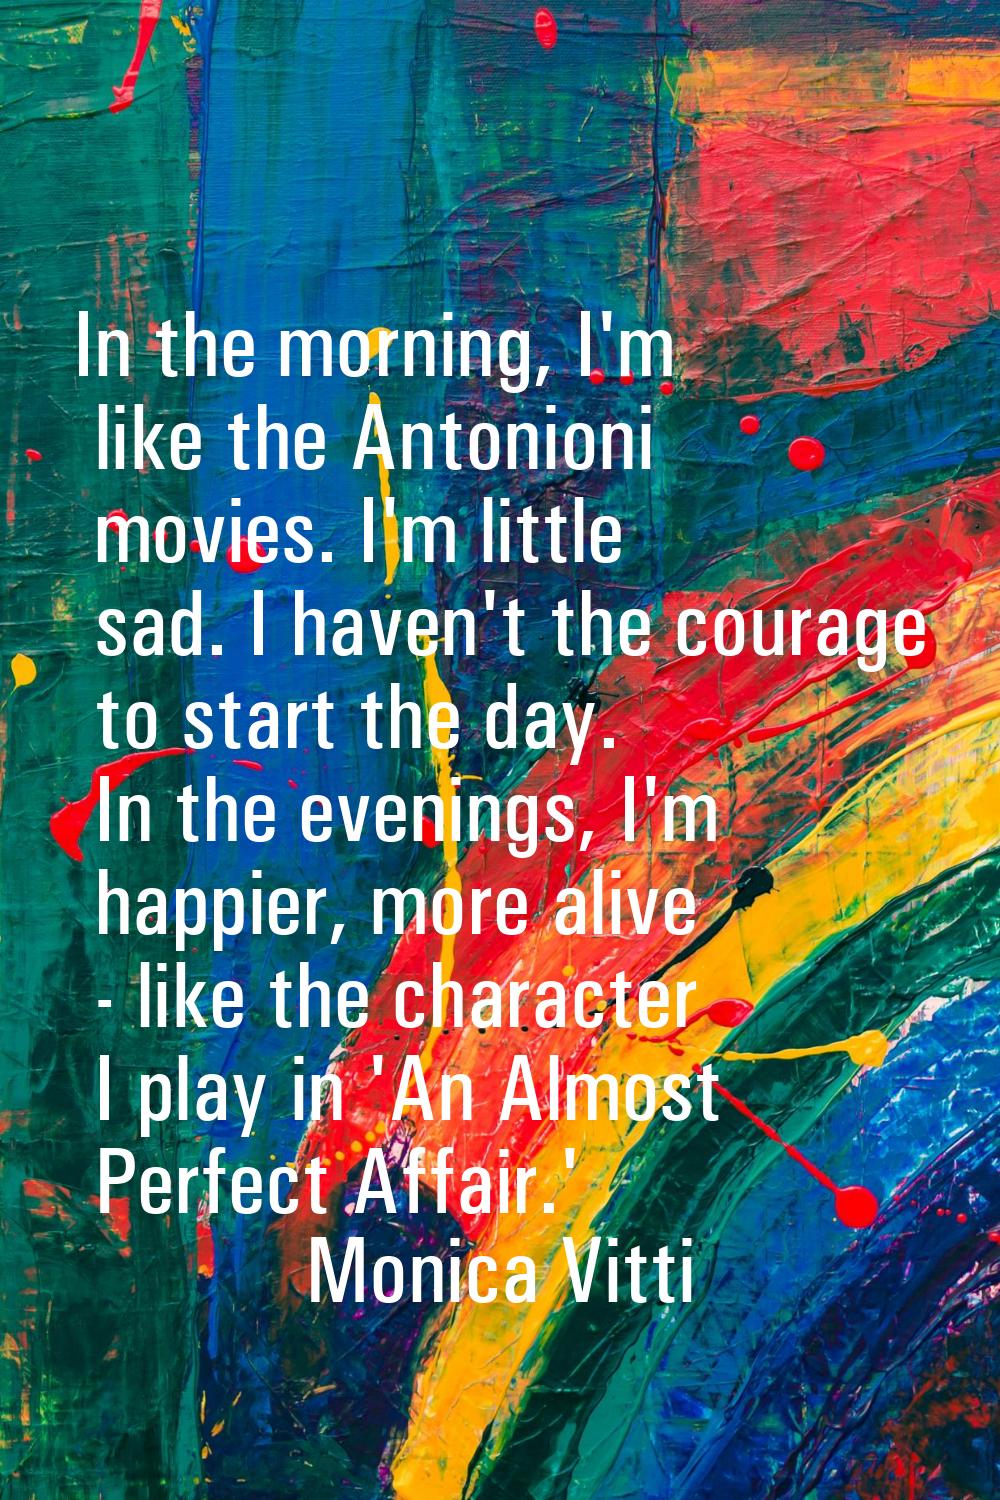 In the morning, I'm like the Antonioni movies. I'm little sad. I haven't the courage to start the d